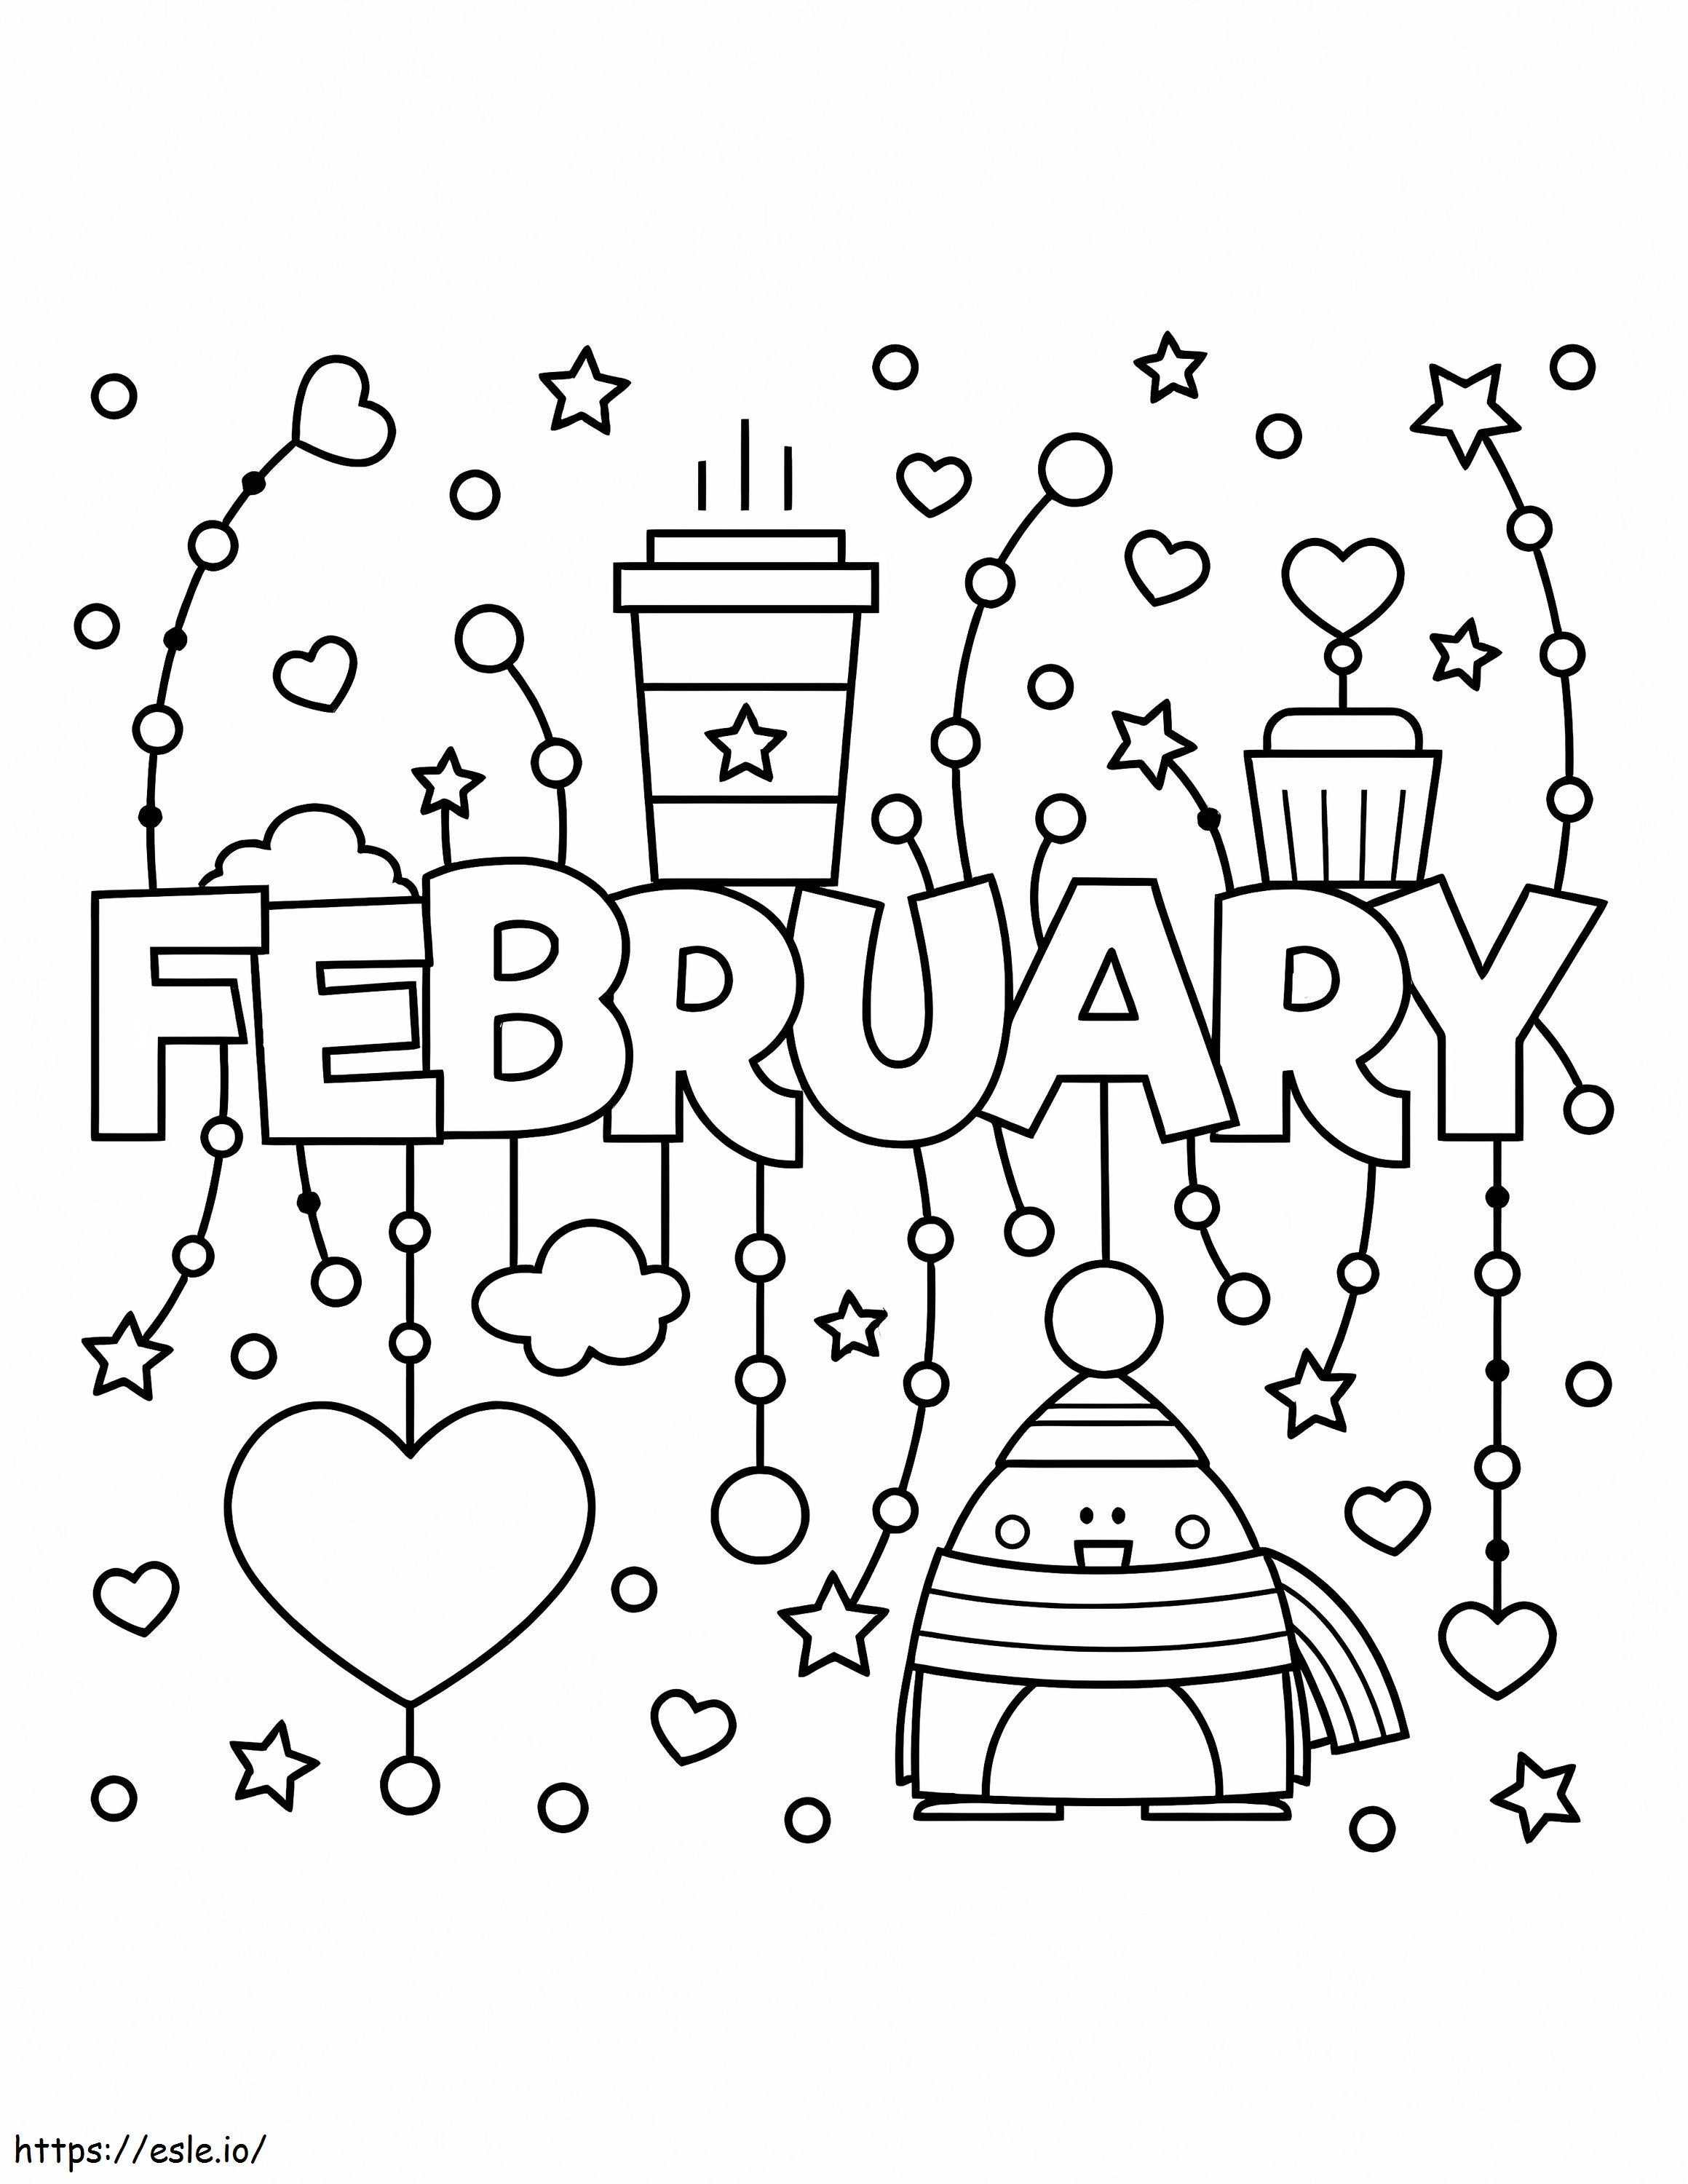 February 4 coloring page